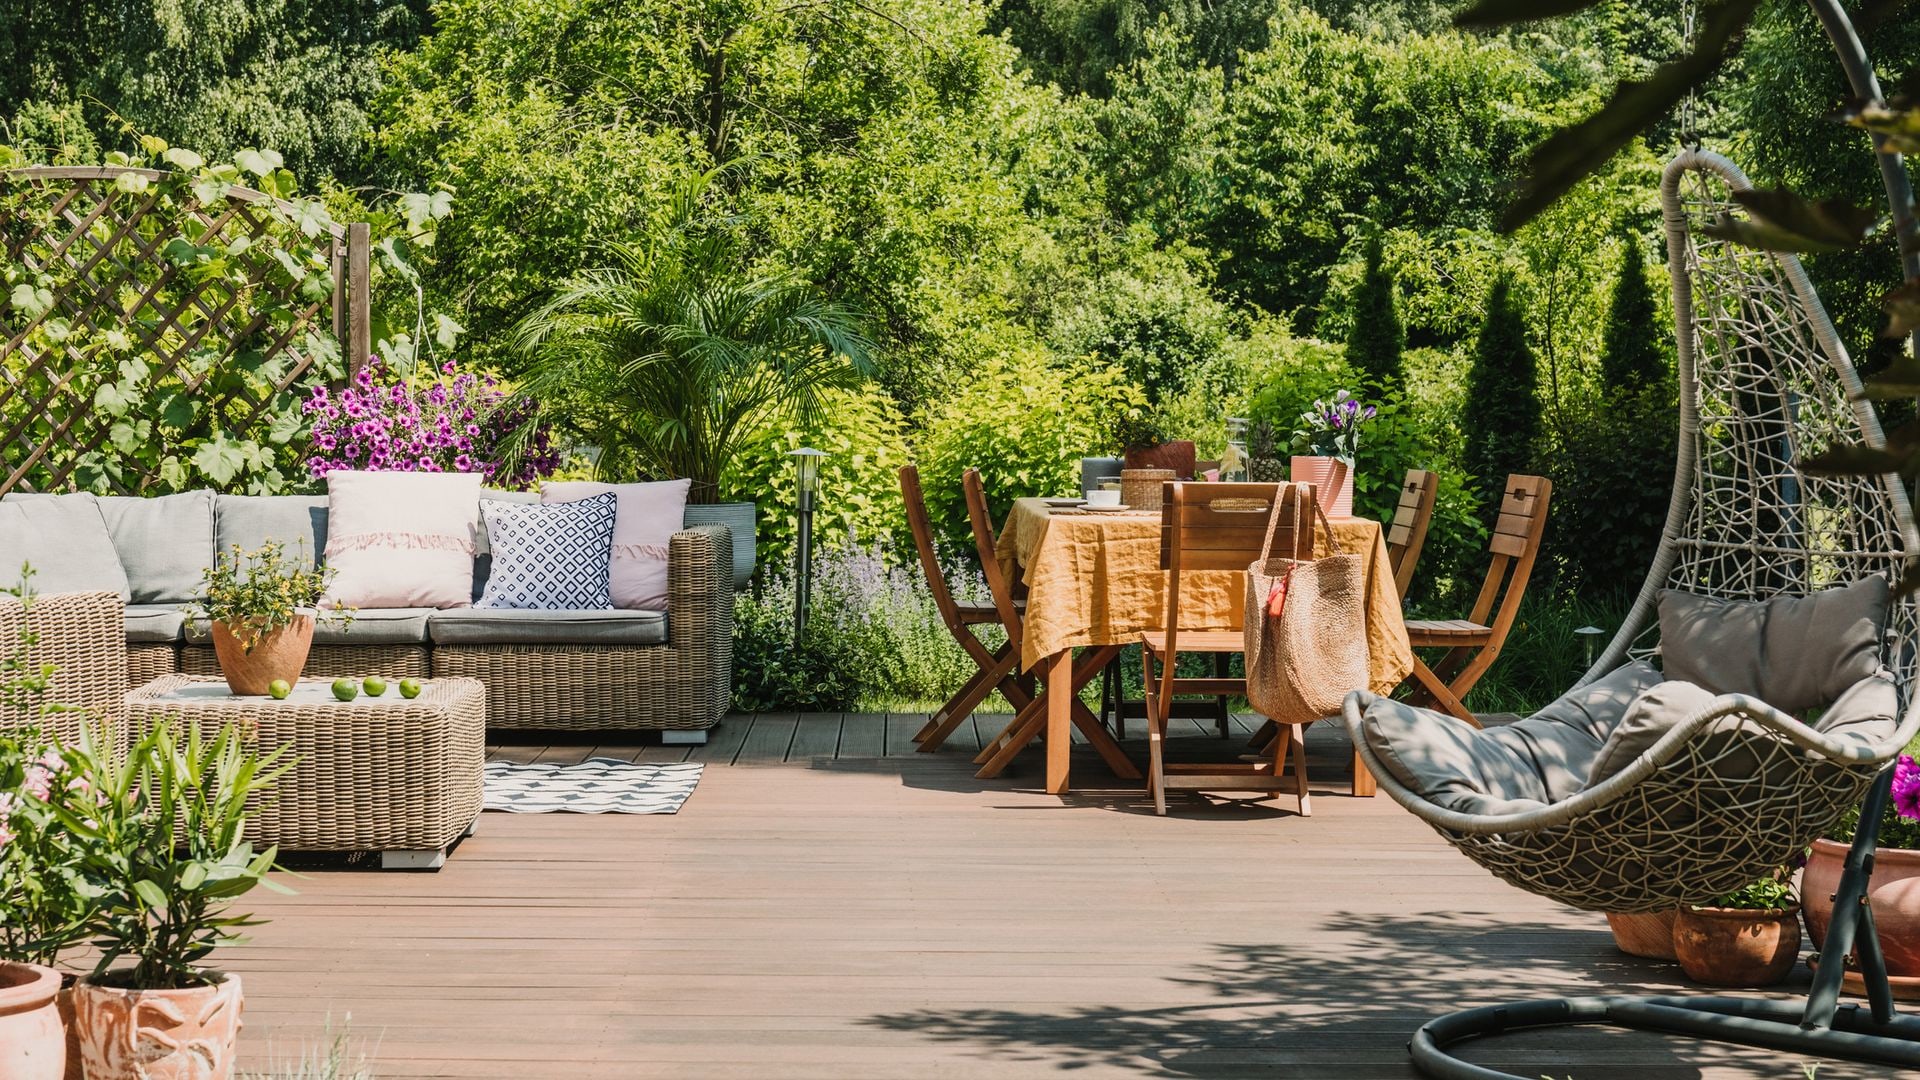 A garden deck with outdoor sofa and dining table